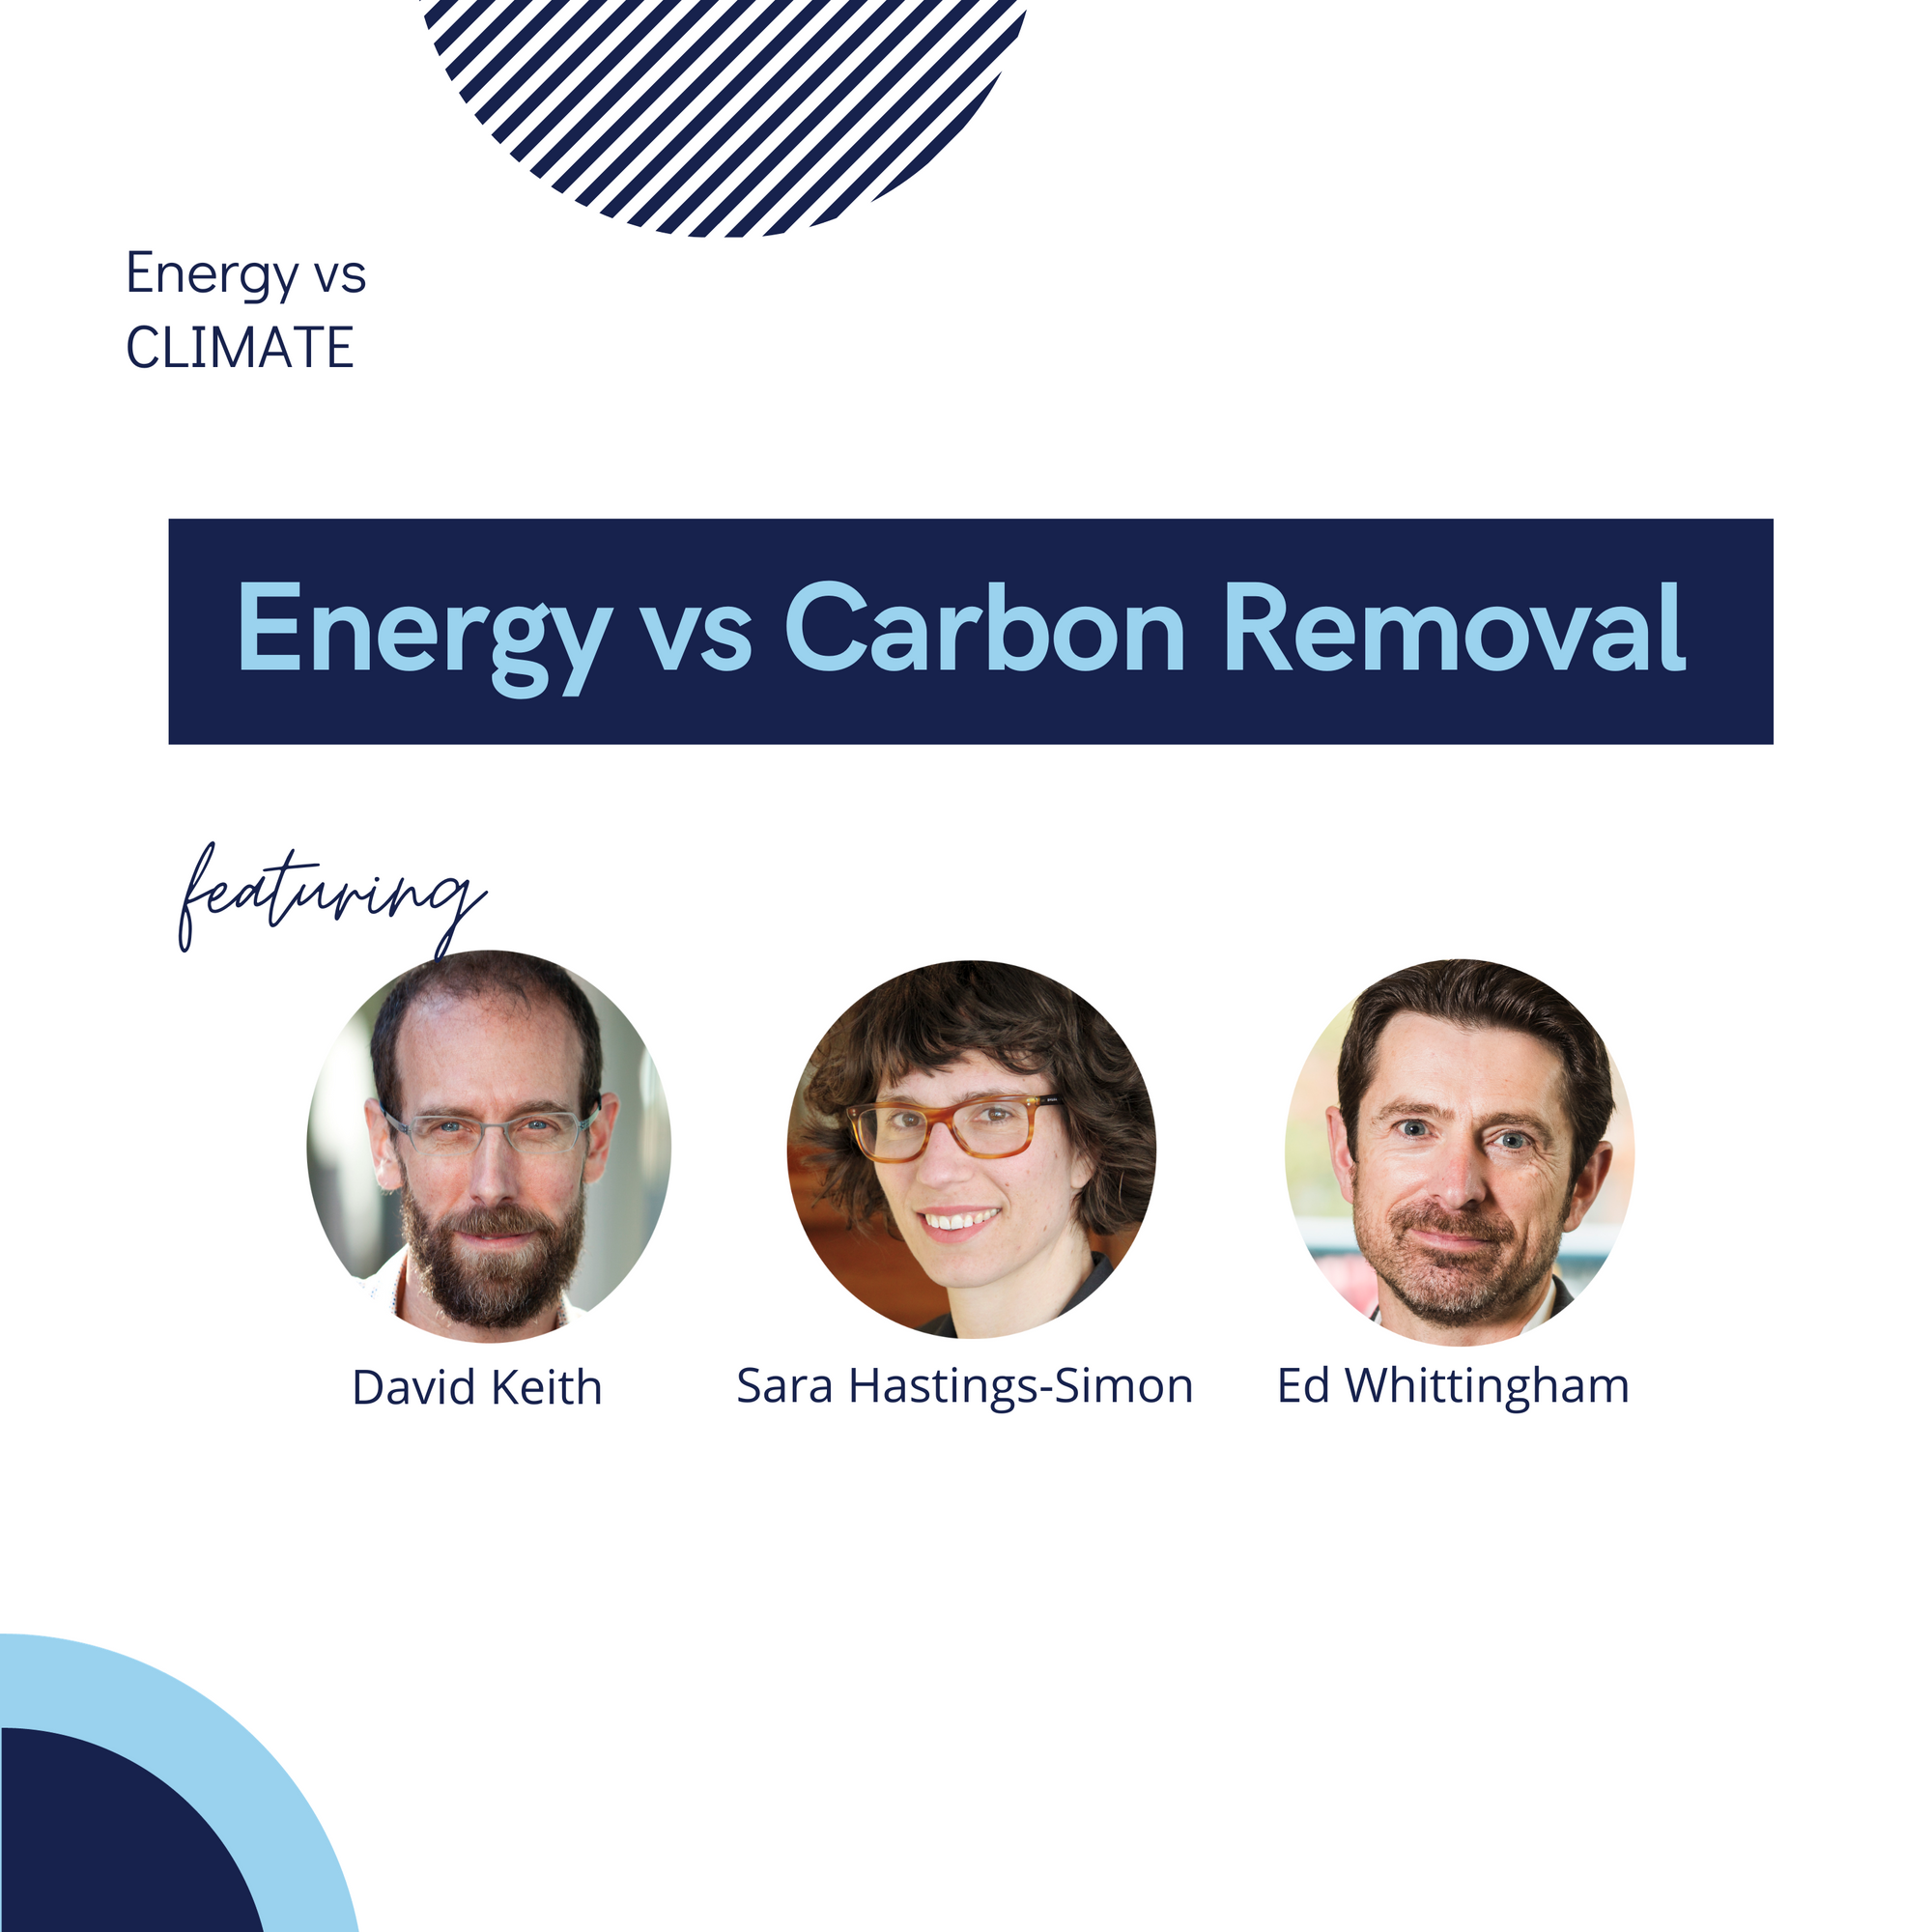 Energy vs Carbon Removal